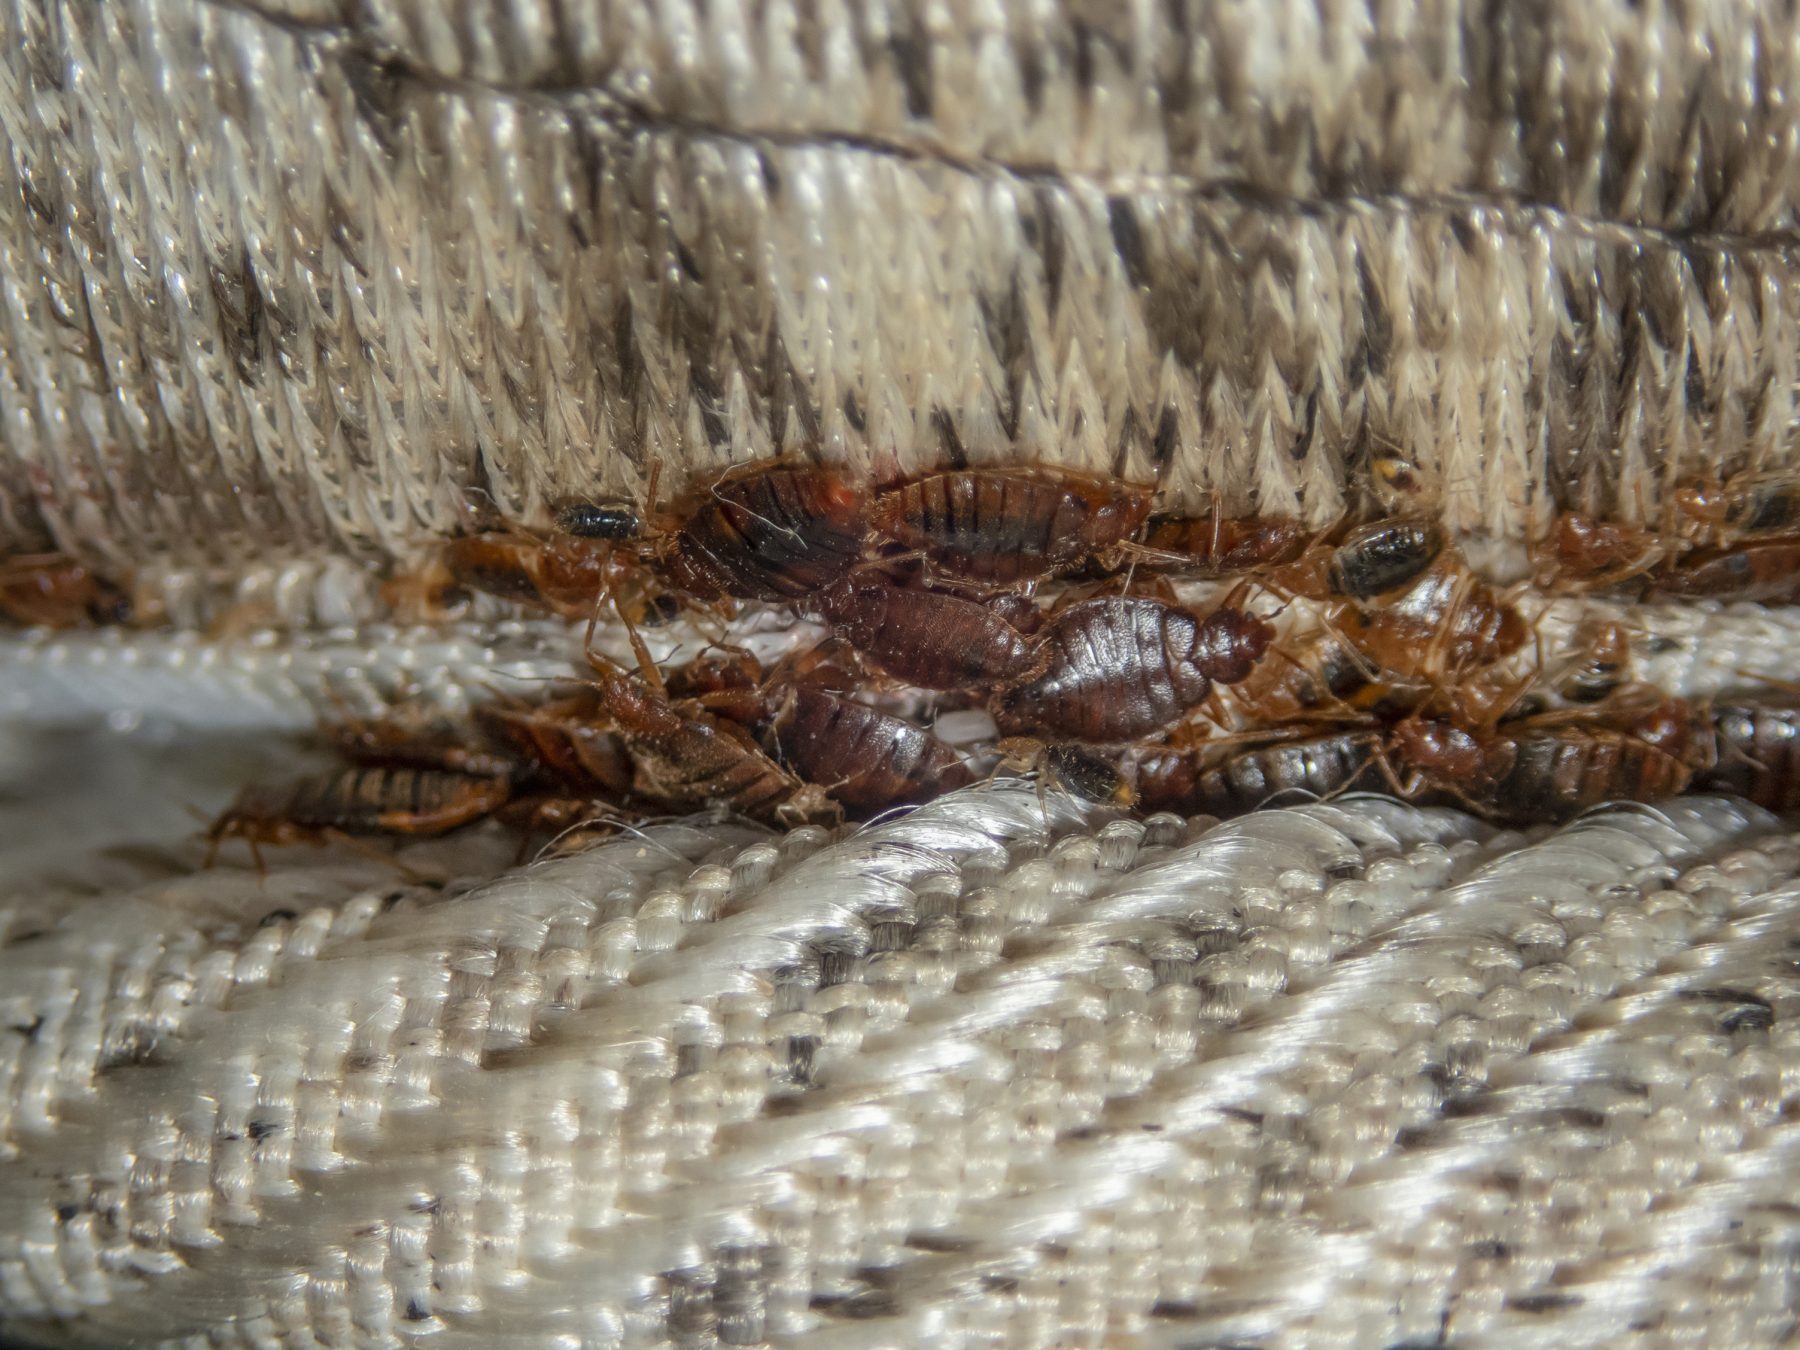 Clump of bed bugs on fabric